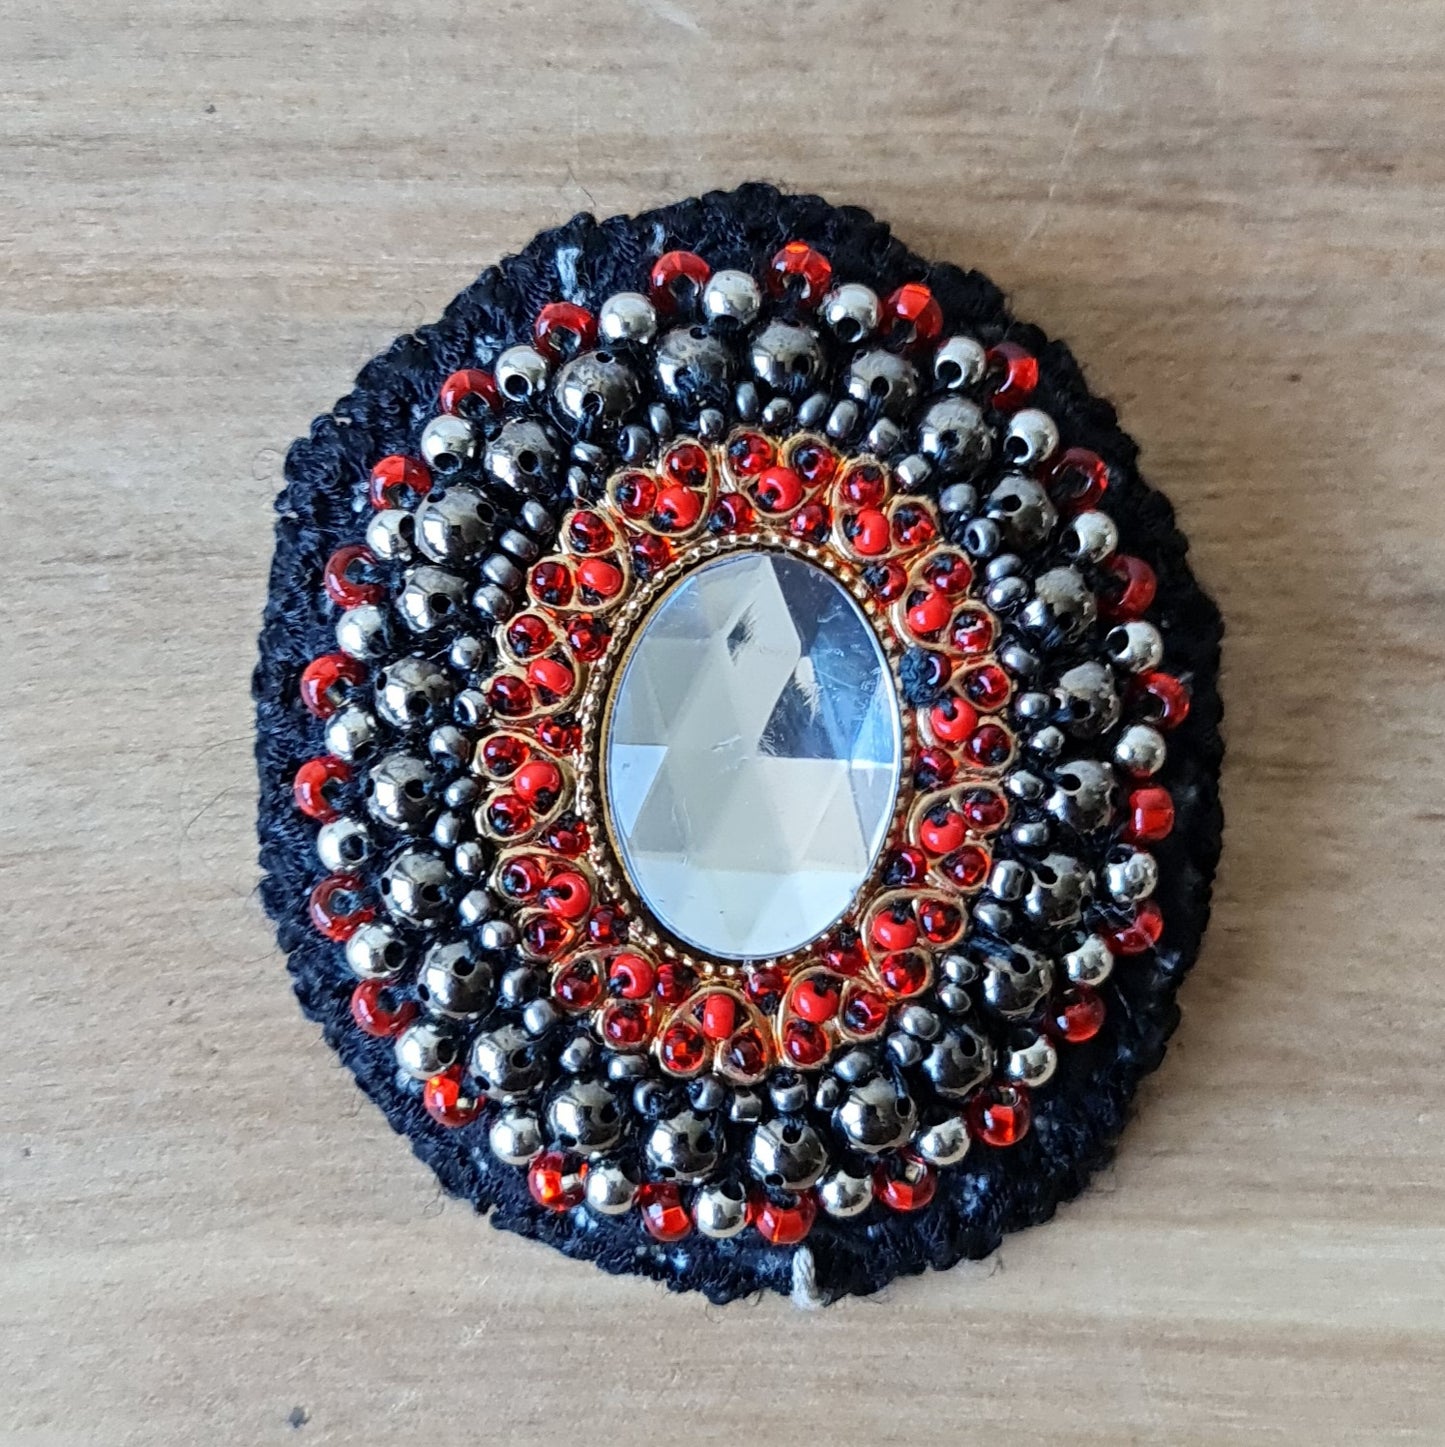 Pearl oval brooch black/red/silver with oval shaped glazed center. Height 7 cm / Width 6 cm (AMA)